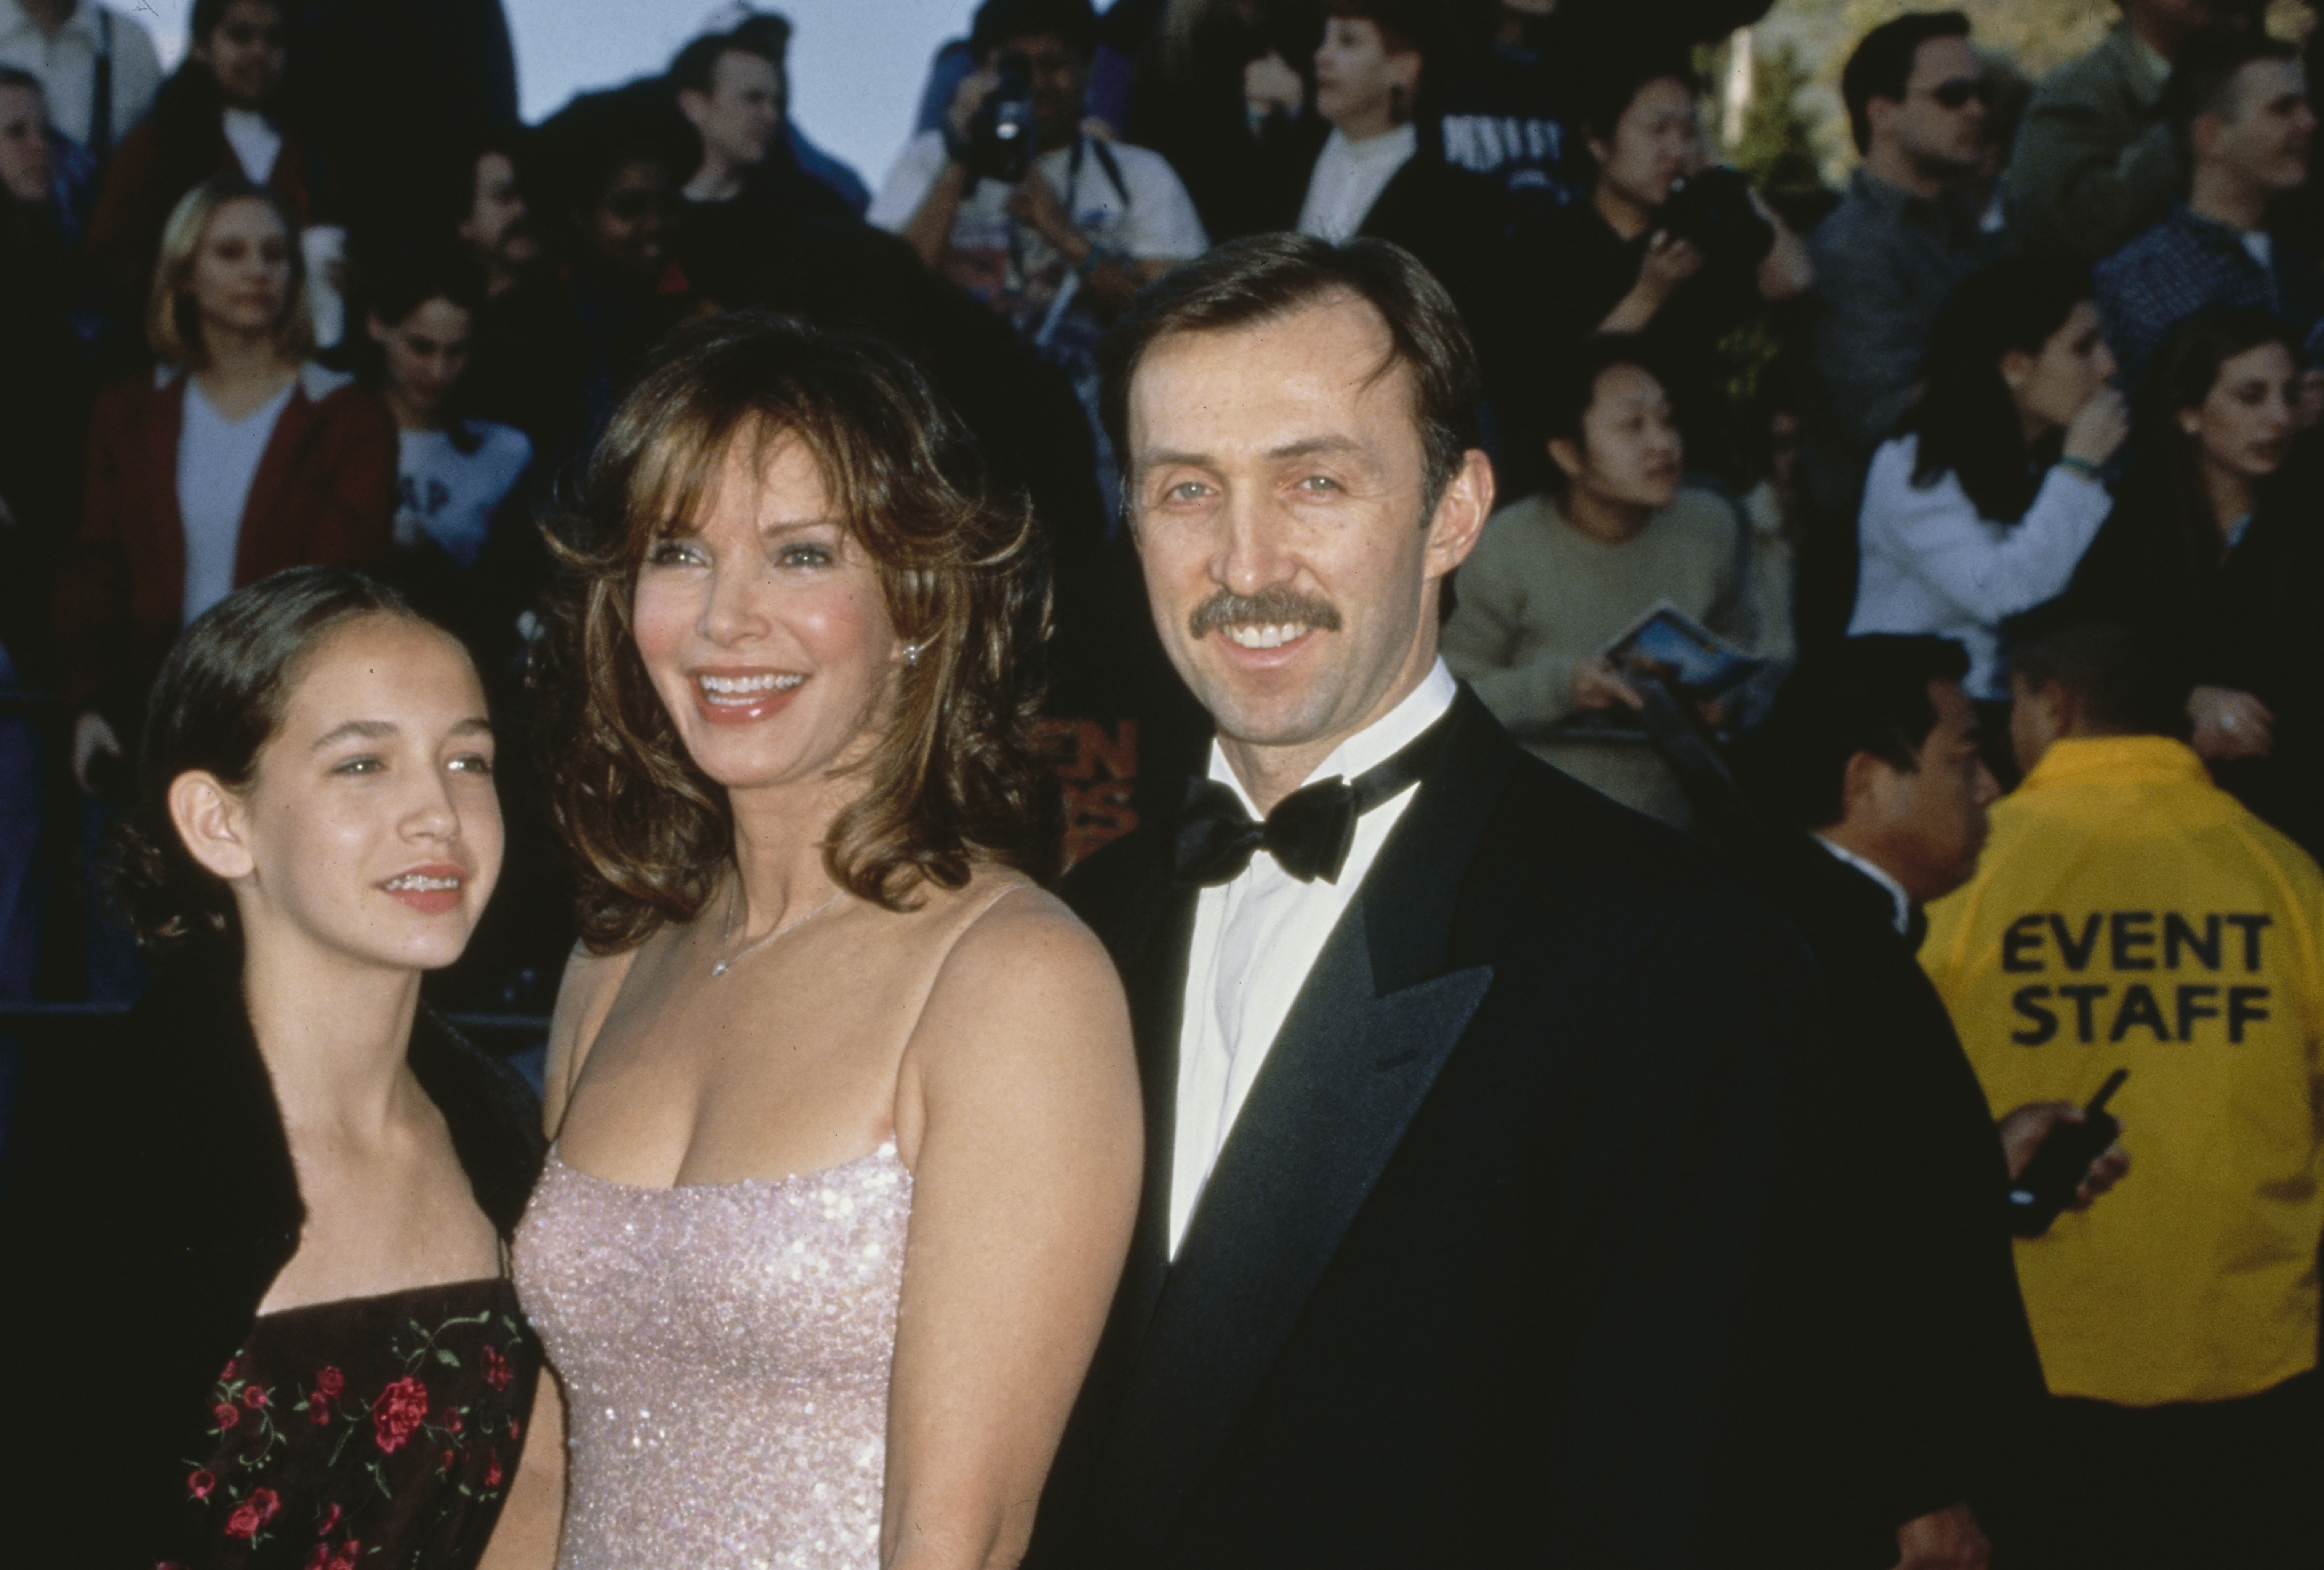 Spencer Richmond, Jaclyn Smith, and Brad Allen at the 5th Annual Screen Actors Guild Awards in Los Angeles, 1999 | Source: Getty Images